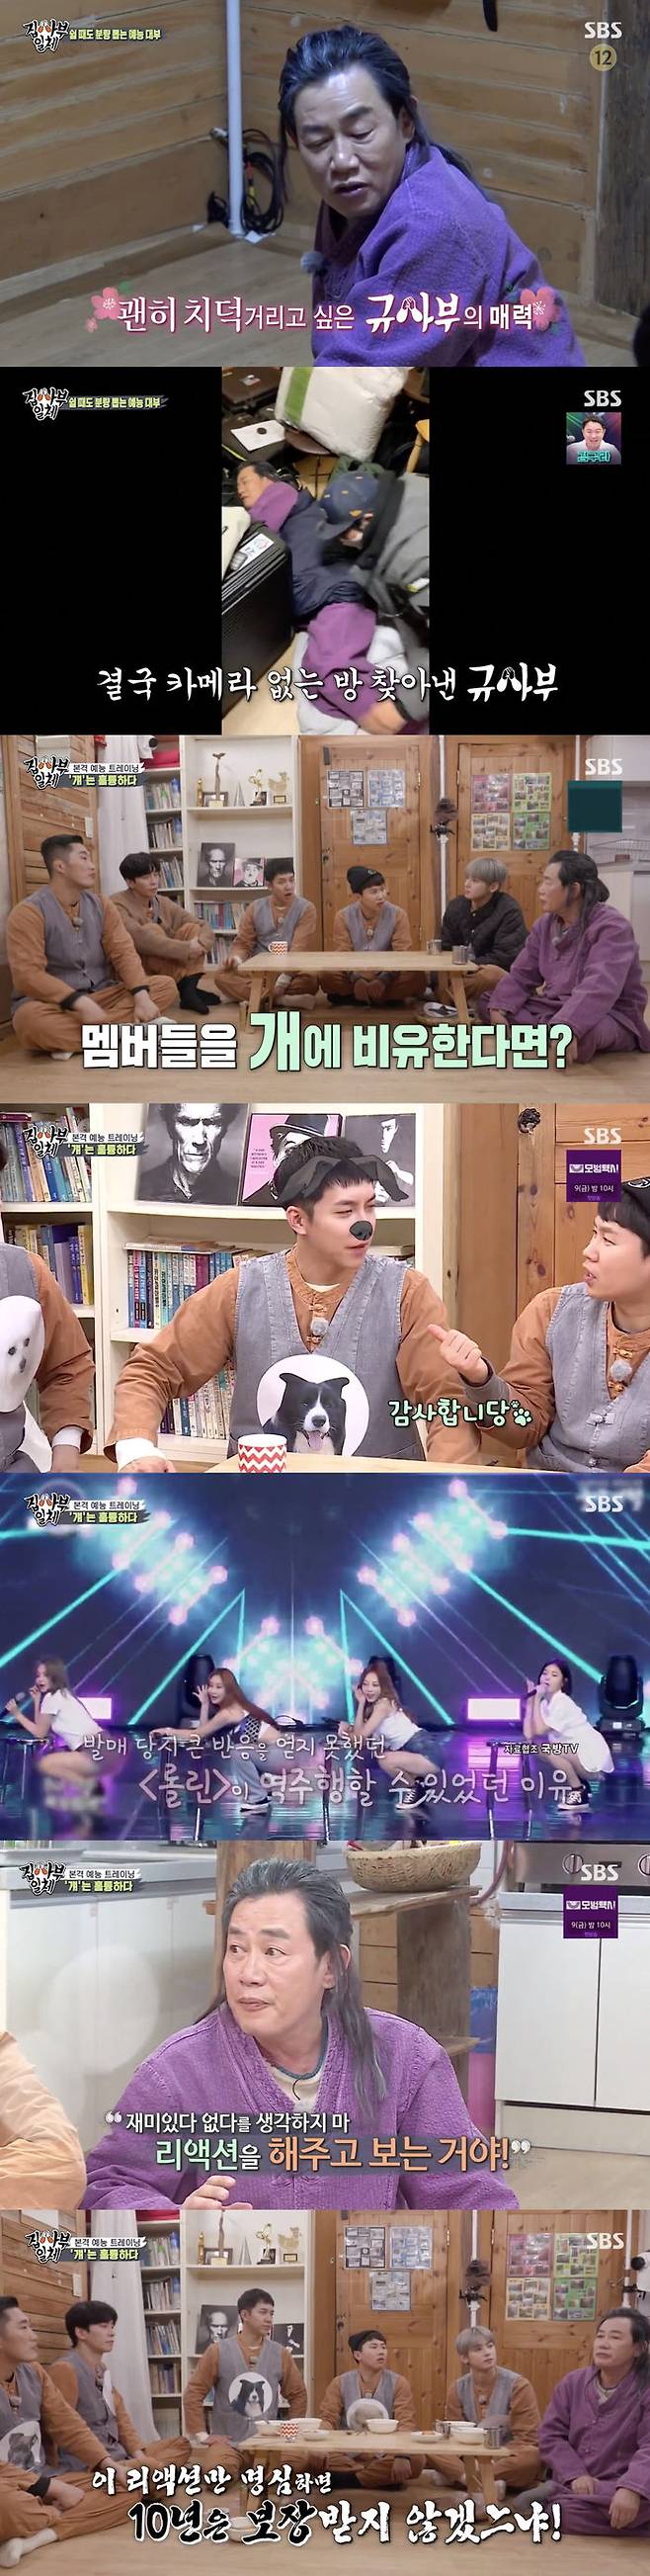 Lee Kyung-kyu underscored the importance of Chain ReactionOn SBS All The Butlers broadcasted on the 4th, entertainment godfather Lee Kyung-kyu appeared as master.Lee Kyung-kyu, who finished lunch on the day, said, I do not like it because I come out on the air and I do not like it.The disciples then referred to other broadcasts and asked why they were cooking hard there, and Lee Kyung-kyu said, This is different.It is a food program and it is not this, he said. All The Butlers is important to talk to the master. The other thing is the side. And Lee Kyung-kyu has now had lunch, so she went into the room to rest and fell asleep.However, the disciples who were worried about the amount continued to be restless, and they came to Lee Kyung-kyu and asked about it.Lee Kyung-kyu then said, Why! Its time to rest. Then rest. Dont do this. Hang up here. Why? Dont go back and forth.I went to a room without a camera, and eventually I found a room without a camera and fell into a nap.Lee Kyung-kyus rest ended and full-scale entertainment training began.He said he would catch the tips and characters to become a good entertainer, and made characters by mentioning each dog that comes to mind when he sees each student.Kim Dong-hyun said that he was a cheerful golden retriever because he had a blind dog American pit bull terrier, Shin Sung-rok was a mild maltese, Lee Seung-gi was a smart Border Collie, Yang Se-hyeong was an Ankaljin Pomeranian,He also said he was a clever, smart, and world-class dog Shepherd.Yang Se-hyeong then gave a new character, When I saw it, it seemed like a beagle. Lee Kyung-kyu said, Beagle is a shit dog.Lee Kyung-kyu then commented on Chain Reaction, the flower of entertainment.There is a popular Brave Girls again this time, and thanks to the Chain Reaction of the soldiers, I got excited, he said.Lee Kyung-kyu said: I saw the video and the soldiers were alive.I want to live in this group because of the soldiers. No matter how well you take the music video, it is no better than this Chain Reaction.Thanks to the Chain Reaction of the soldiers, the best movie is completed. And Lee Kyung-kyu confessed that Chain Reaction was able to shine because he had colleagues who were good at Chain Reaction by his weak side.He also attracted attention by citing Lee Yoon-seok as an entertainer who is good at Chain Reaction and boom as the first person of Chain Reaction without soul.Lee Kyung-kyu said, Do not think it is funny once, but do the Chain reaction first. I am honest with my appearance and laugh at Chain reaction and I am looking for me.And he stressed, You will go ahead, this Chain Reaction will only be guaranteed for 10 years in entertainment if you feel of mind.